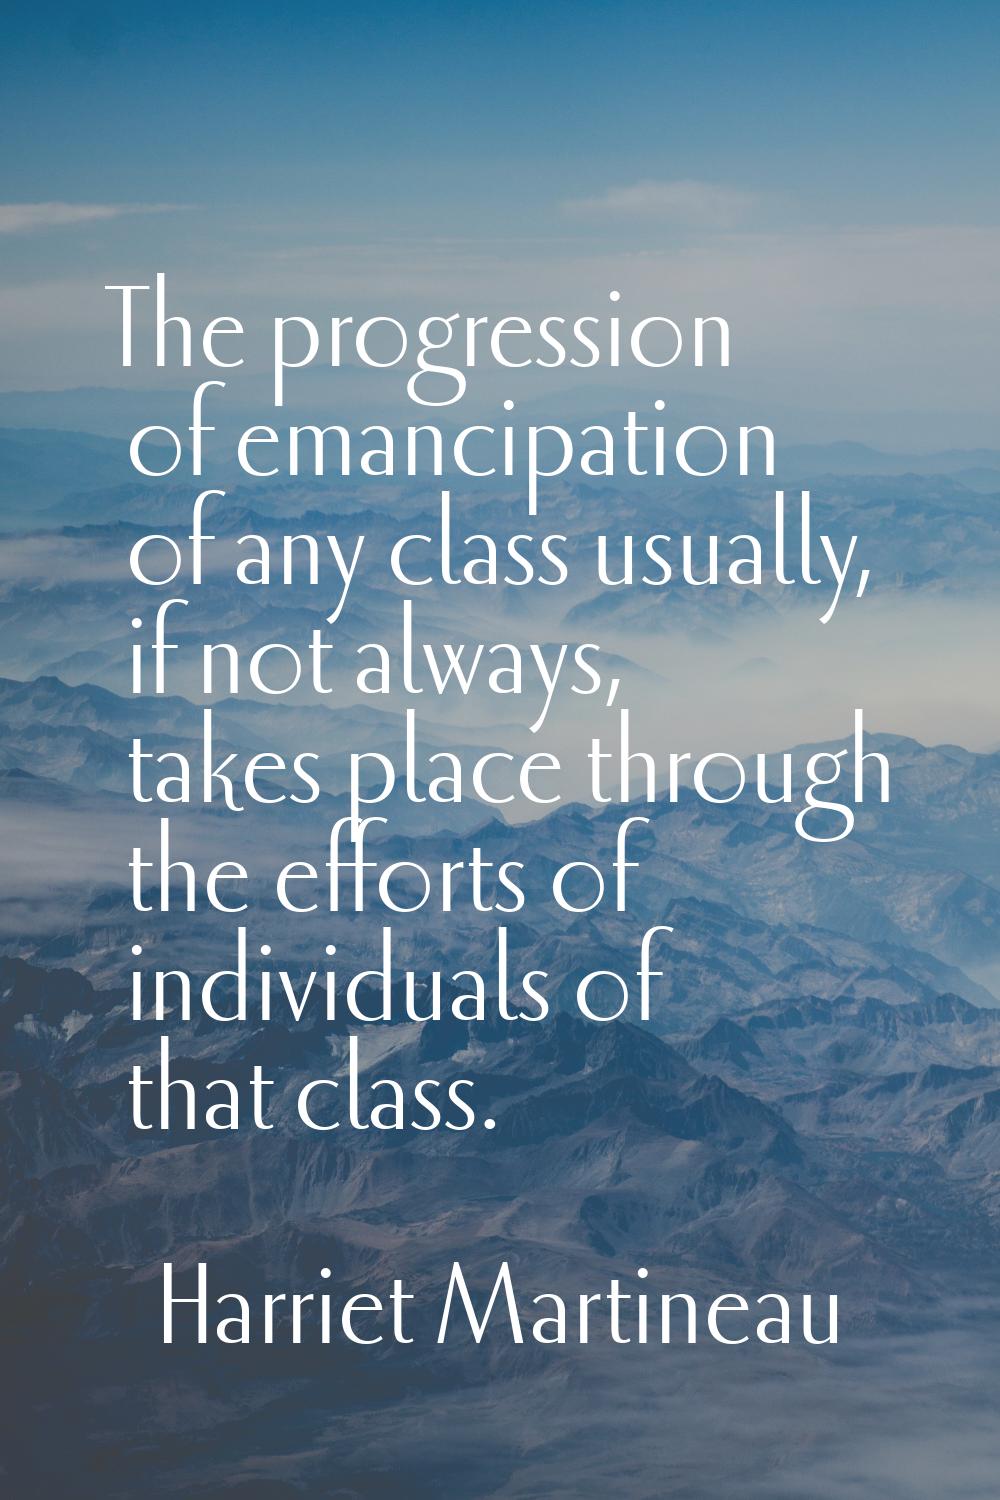 The progression of emancipation of any class usually, if not always, takes place through the effort